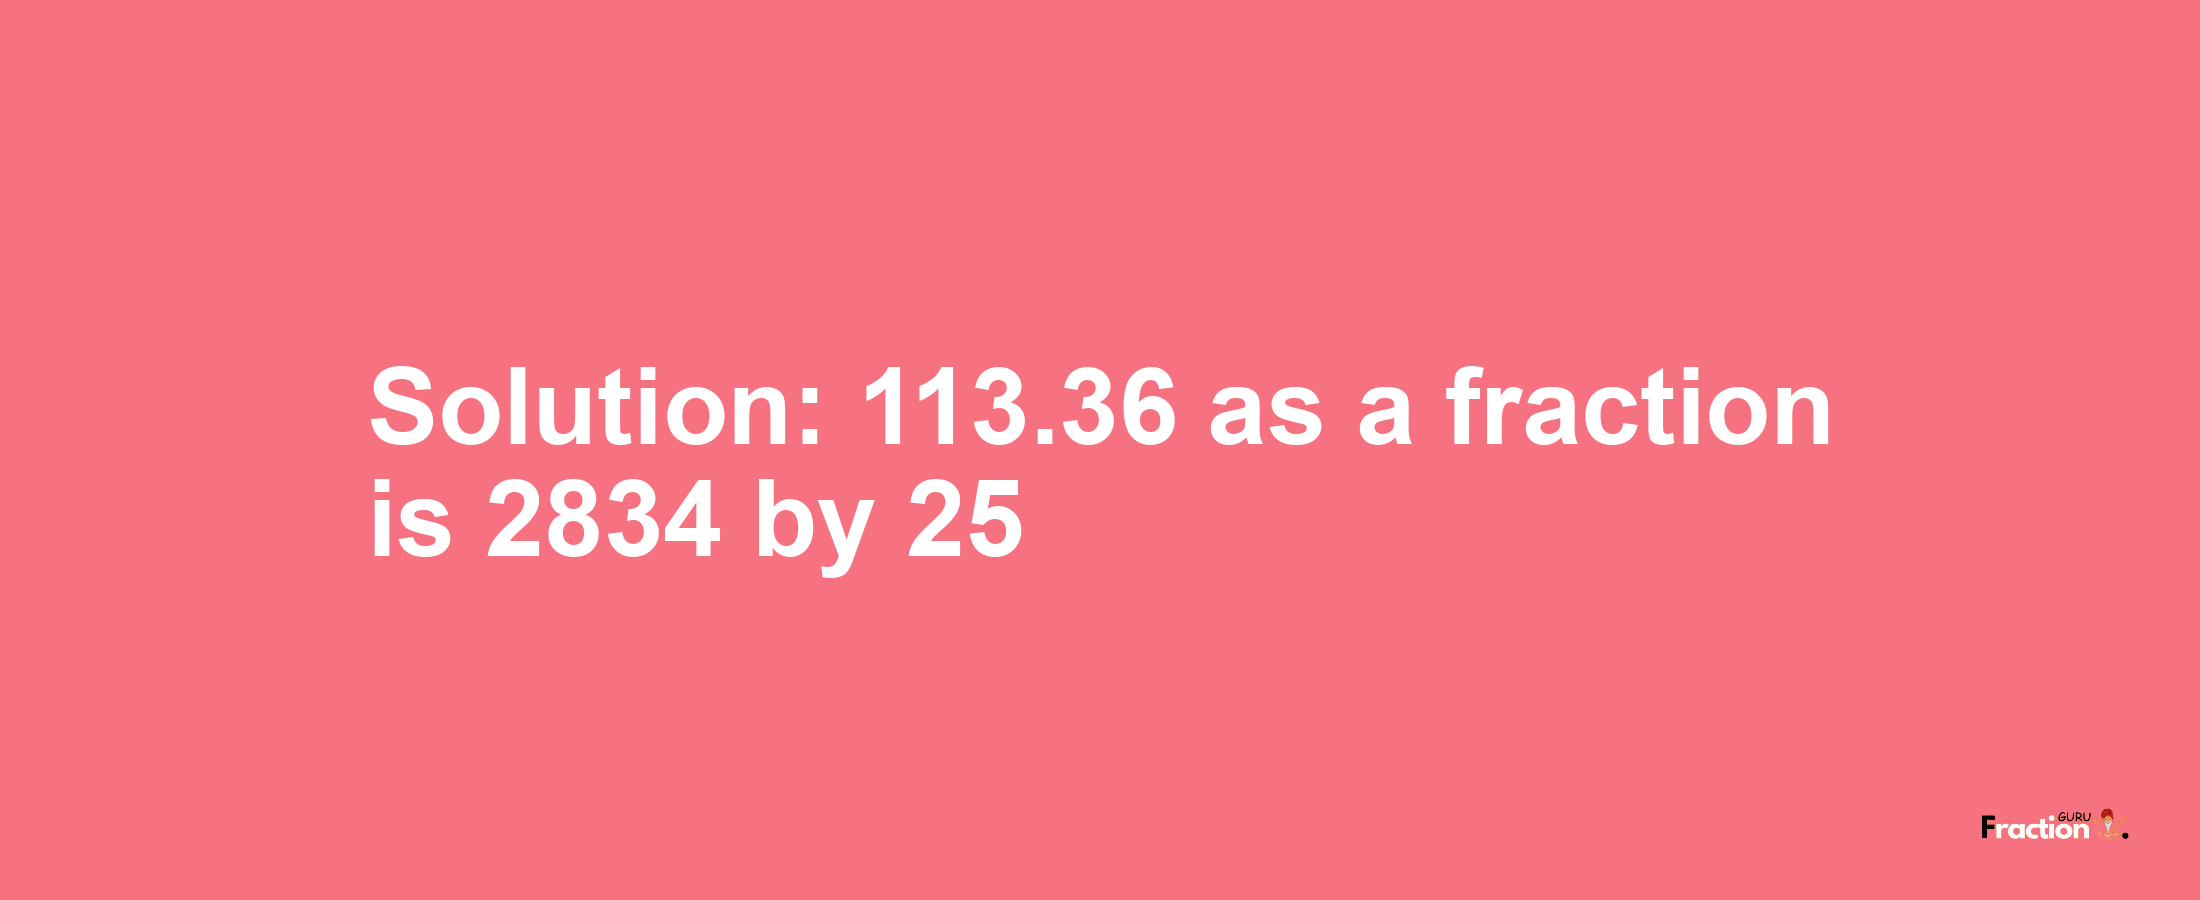 Solution:113.36 as a fraction is 2834/25